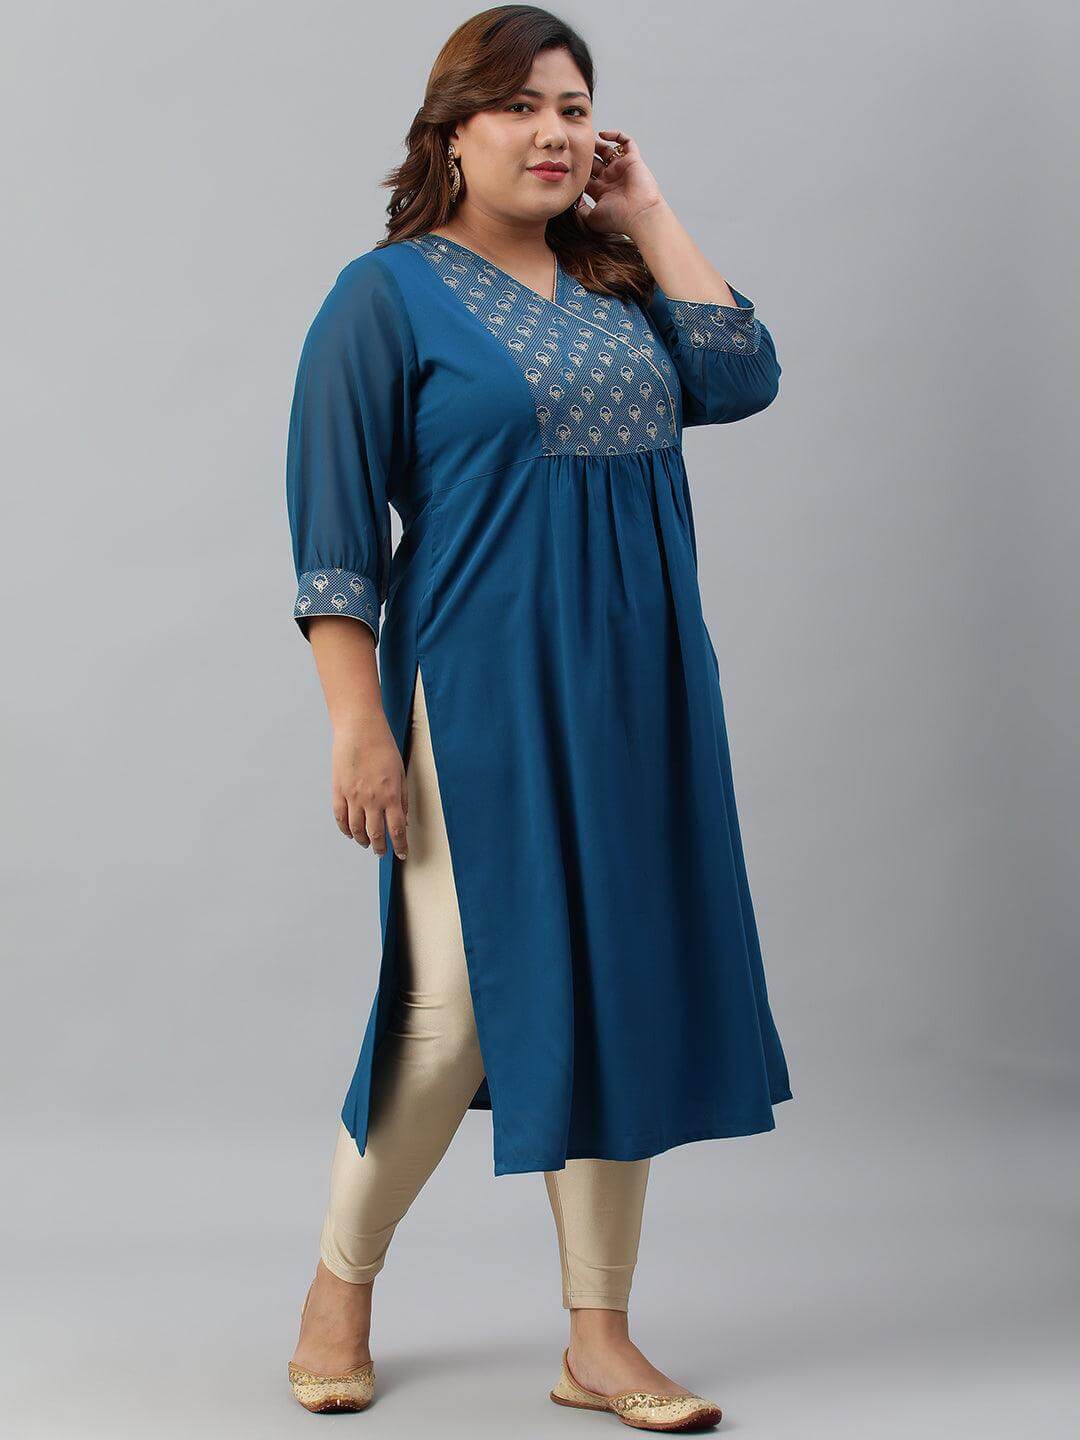 Plus Size Teal Poly Crepe Solid Straight kurta